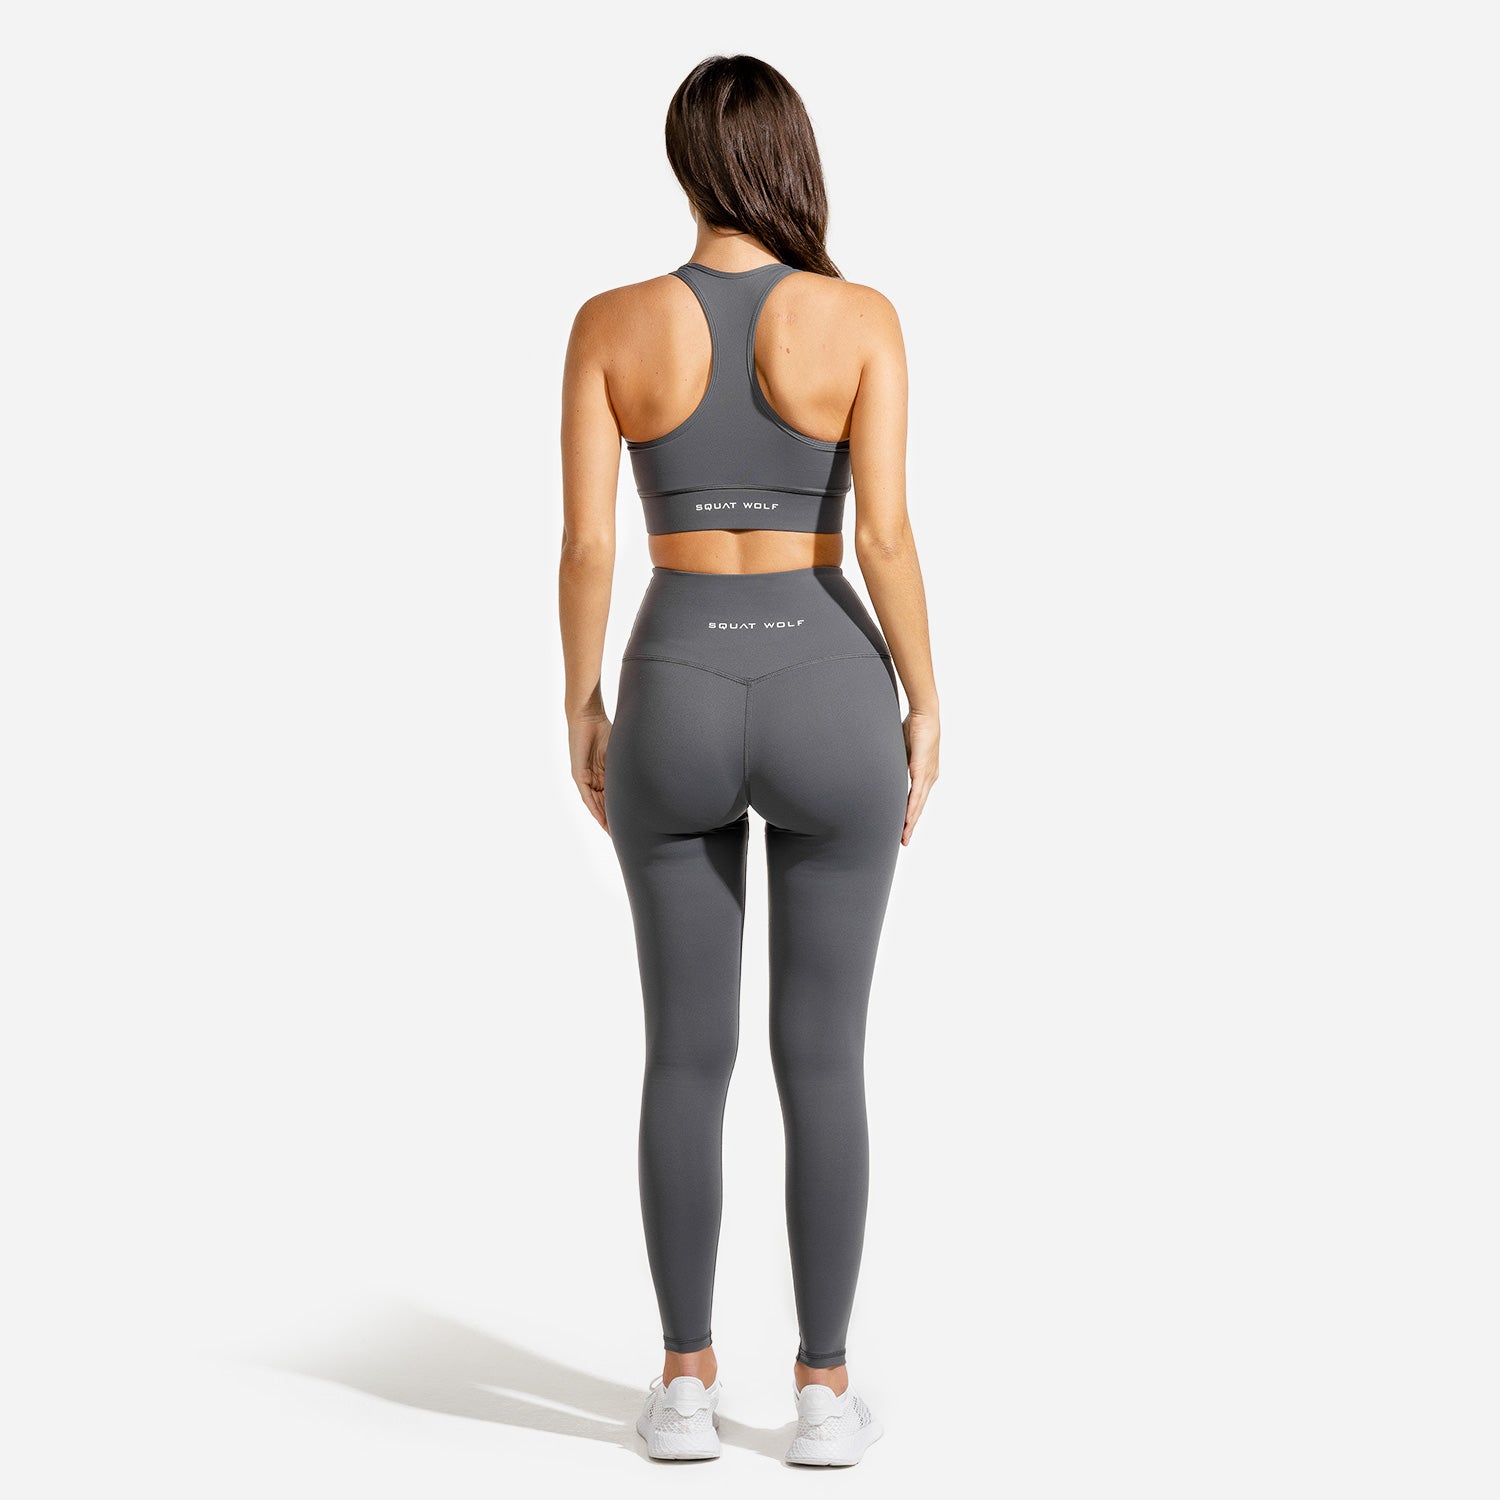 squatwolf-workout-clothes-hera-high-waisted-leggings-charcoal-gym-leggings-for-women